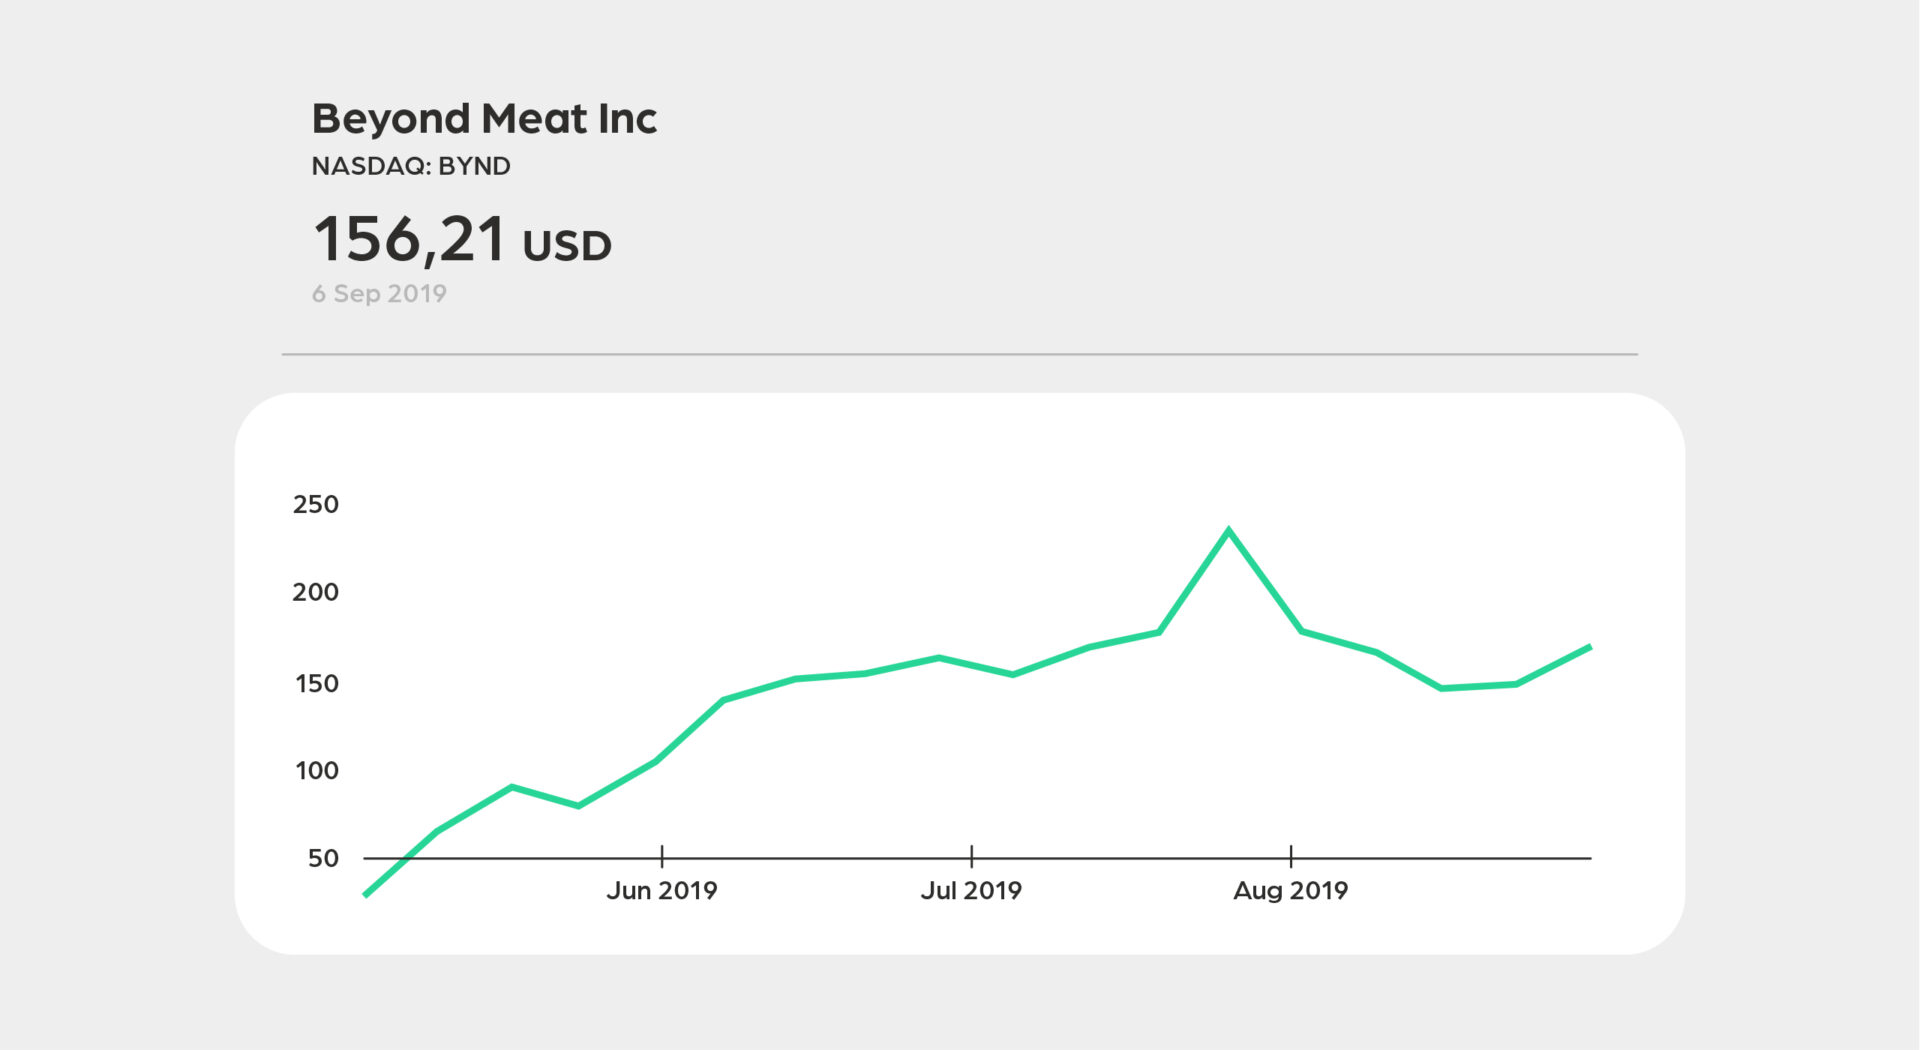 Evolution of the share price of Beyond Meat since its IPO